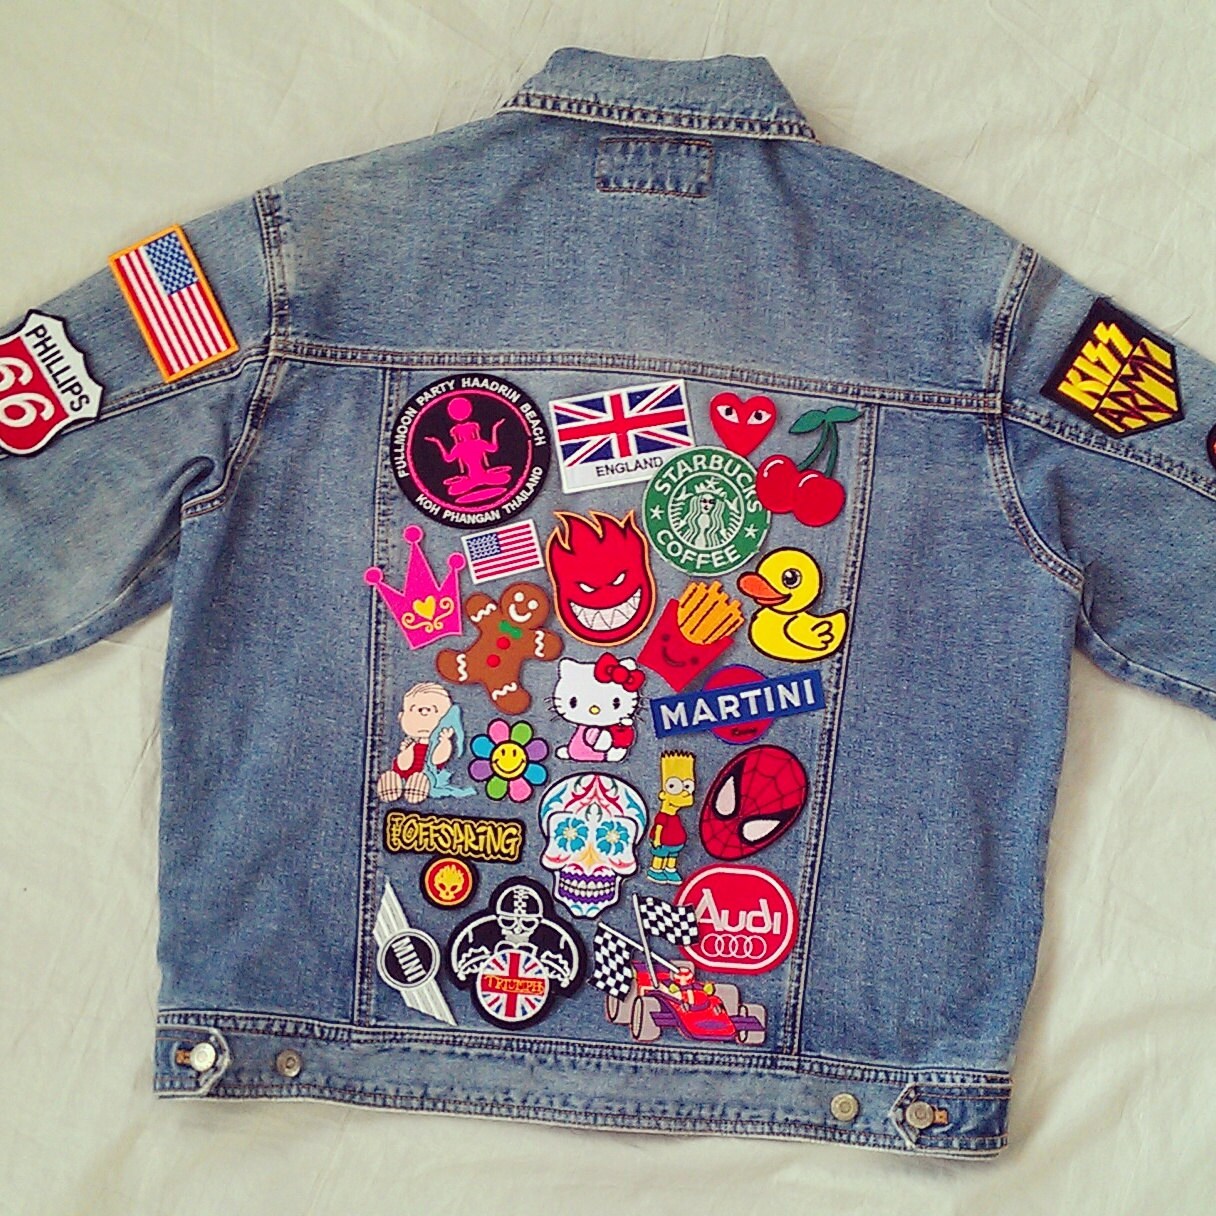 Patched Denim / Reworked Vintage Denim Jacket with Patches